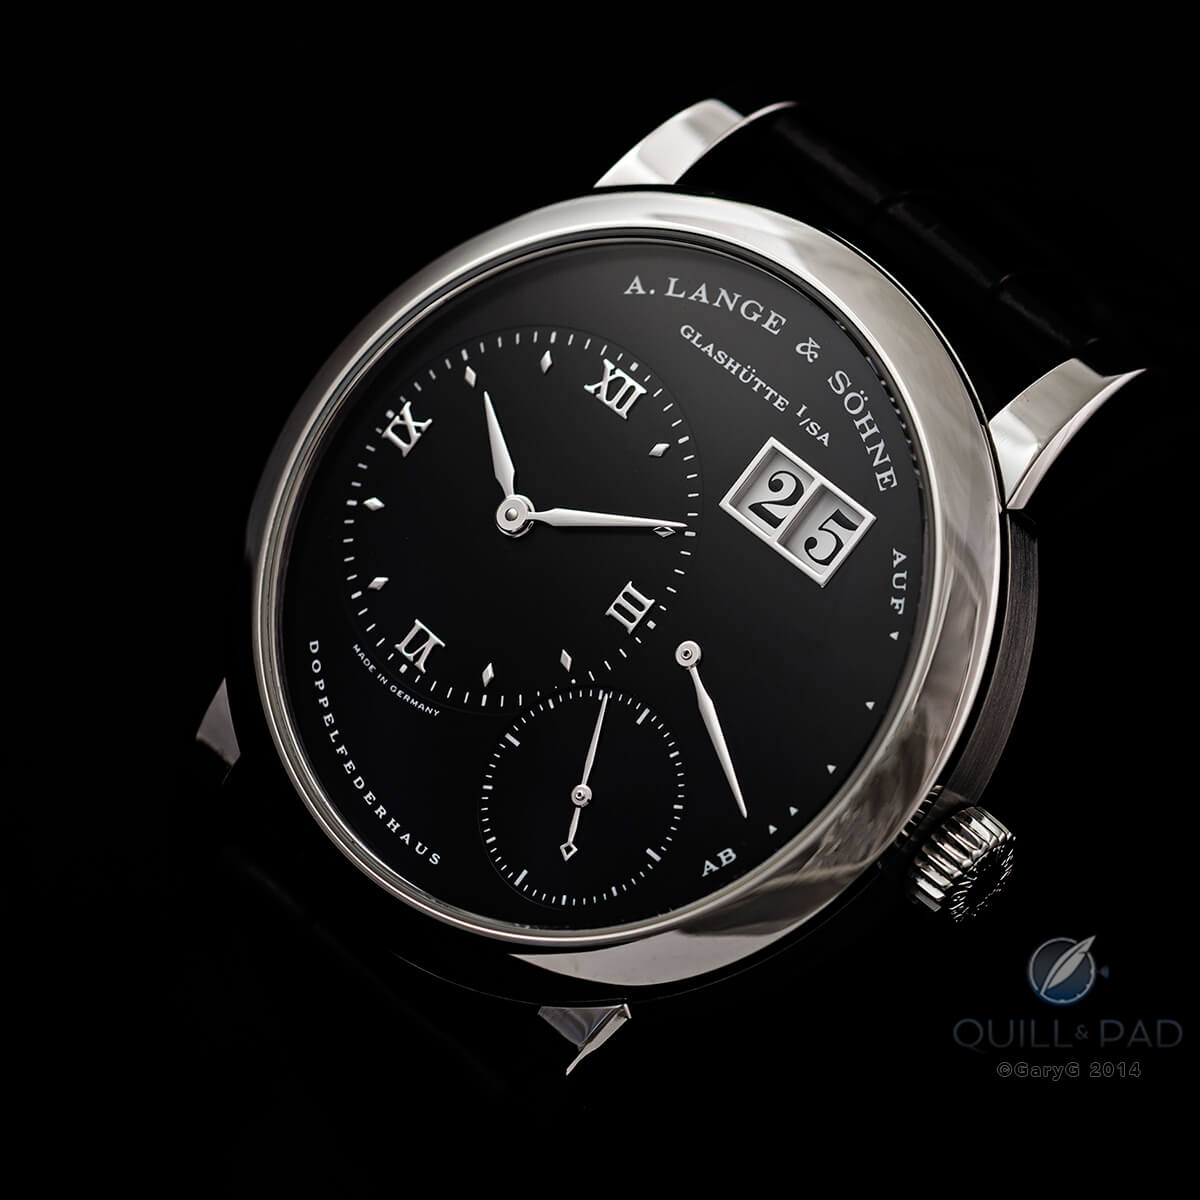 Out of the darkness: the limited-production A. Lange & Söhne Lange 1 in stainless steel